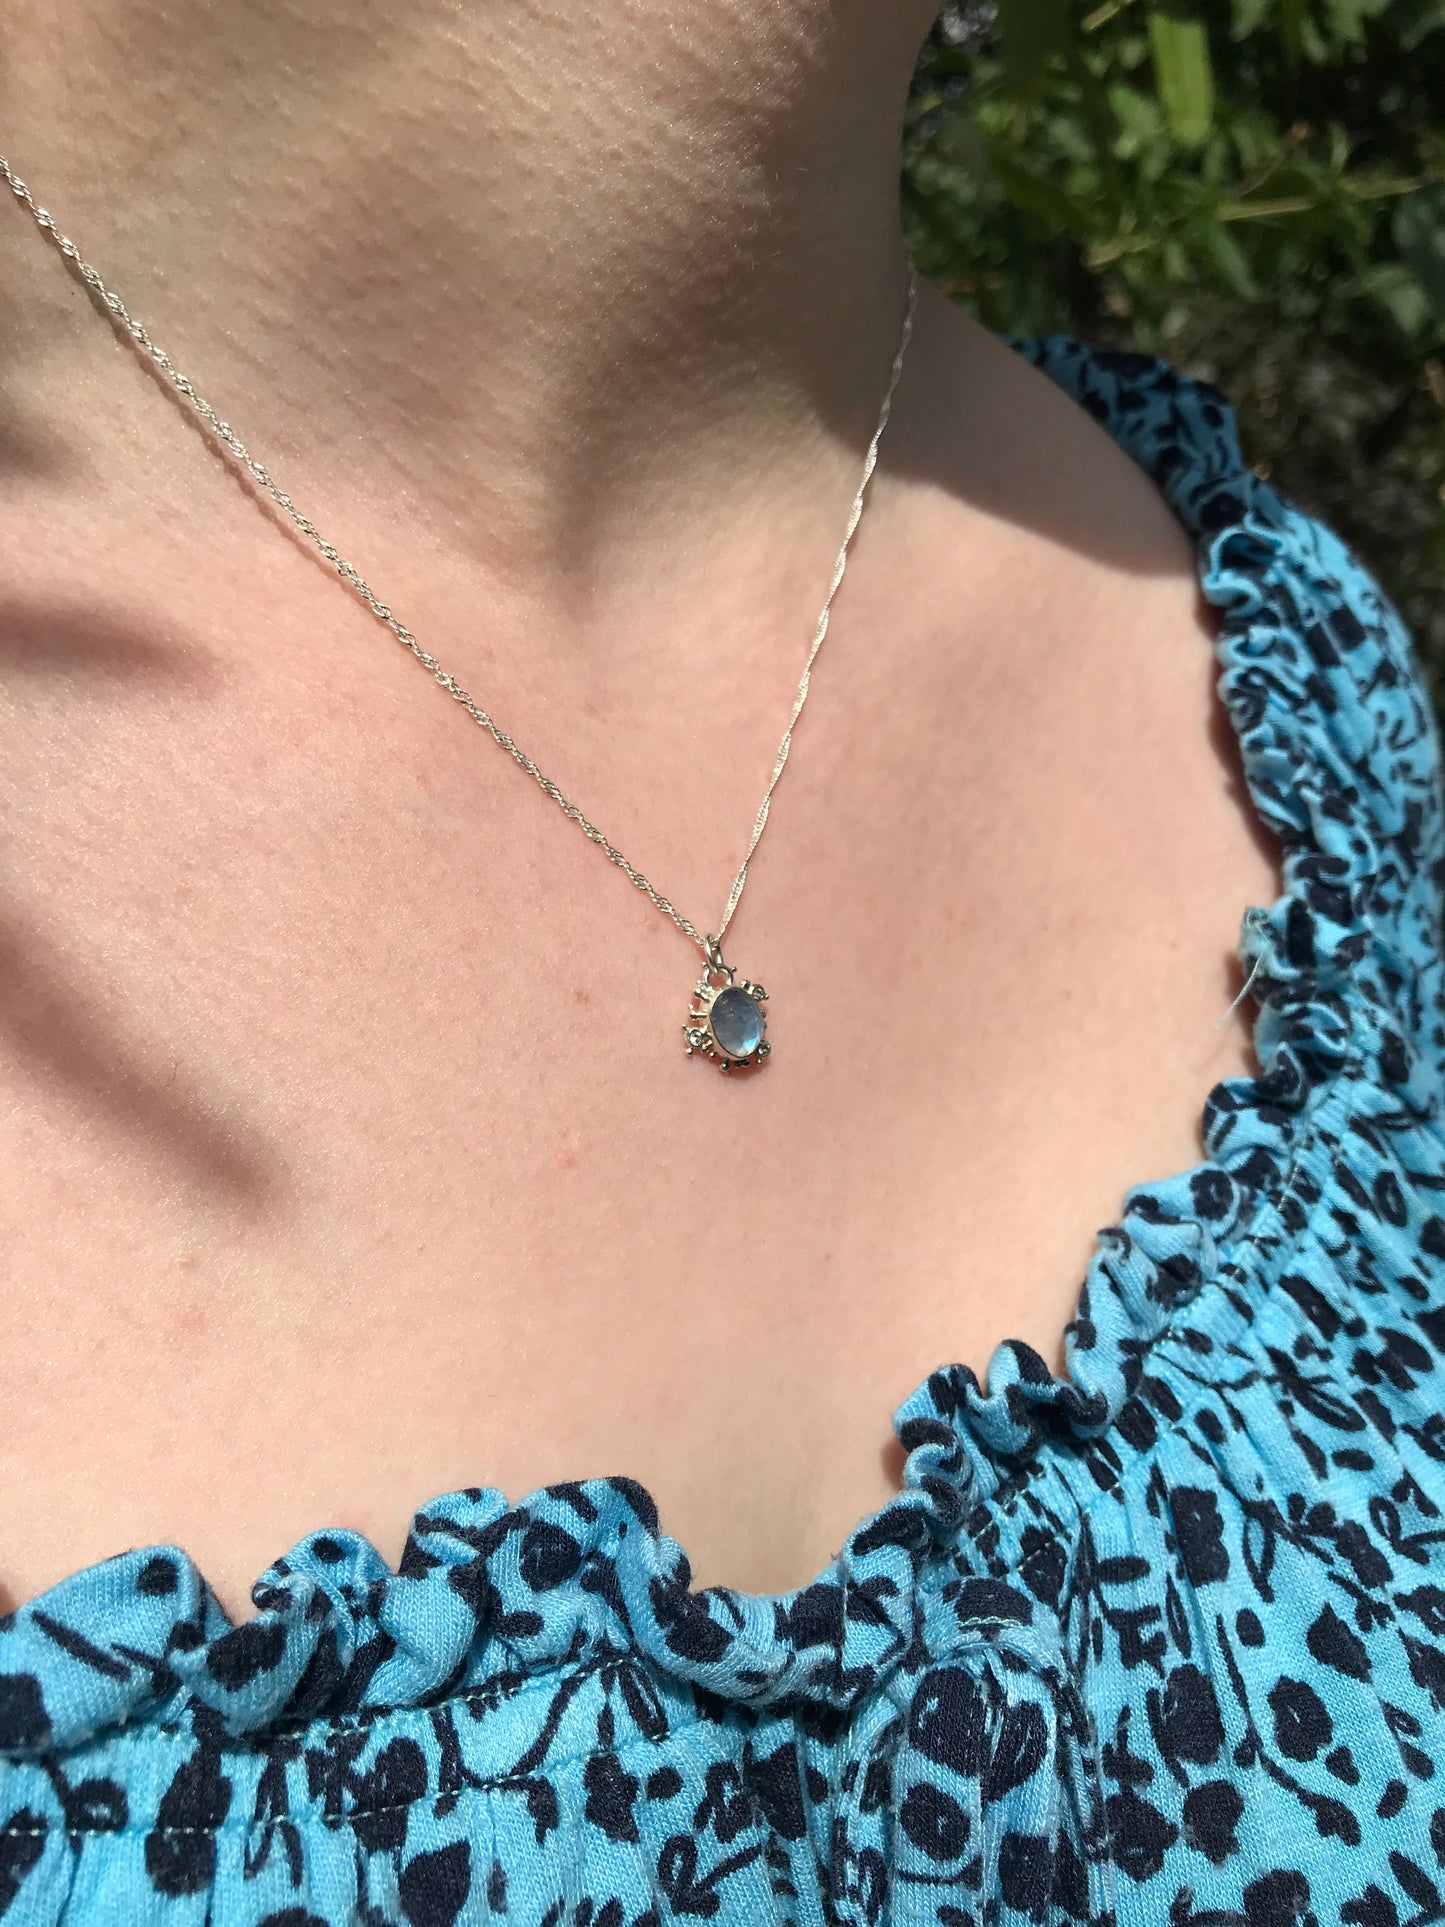 Rainbow Moonstone, White Topaz and Sterling Silver Granulation Pendant Necklace on Twisted Sterling Silver Chain